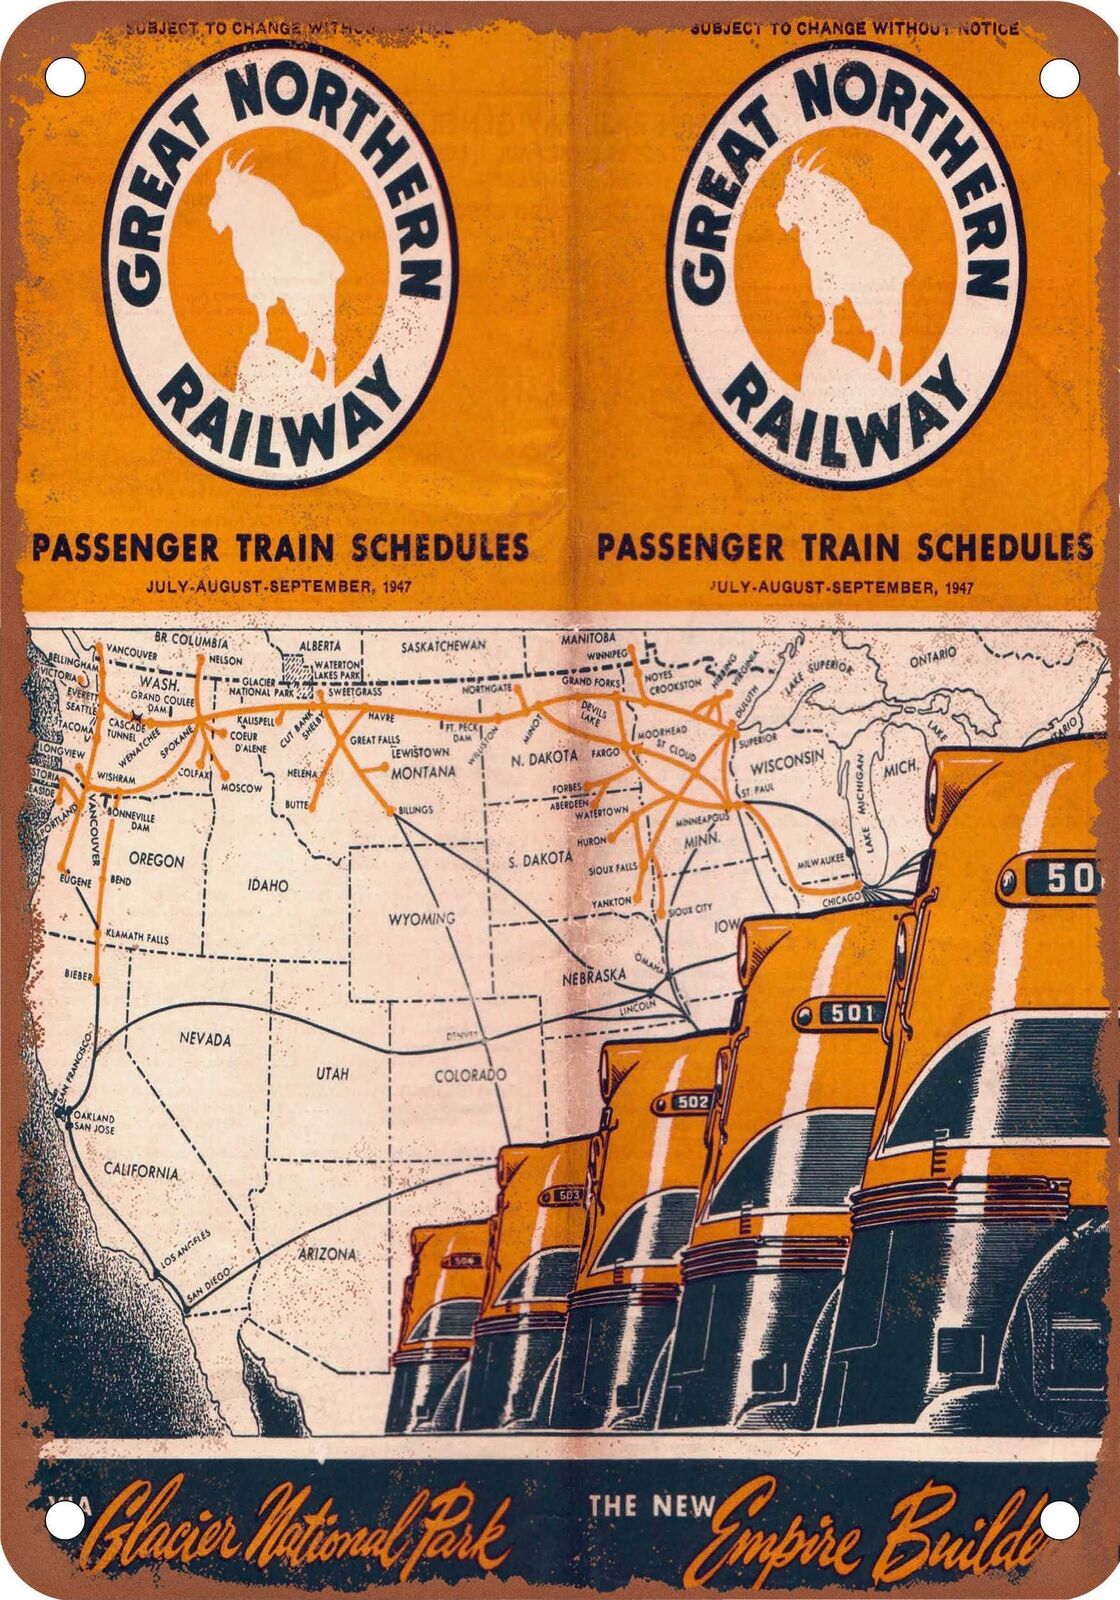 METAL SIGN - 1947 Great Northern Schedule and Route Map - Vintage Rusty Look